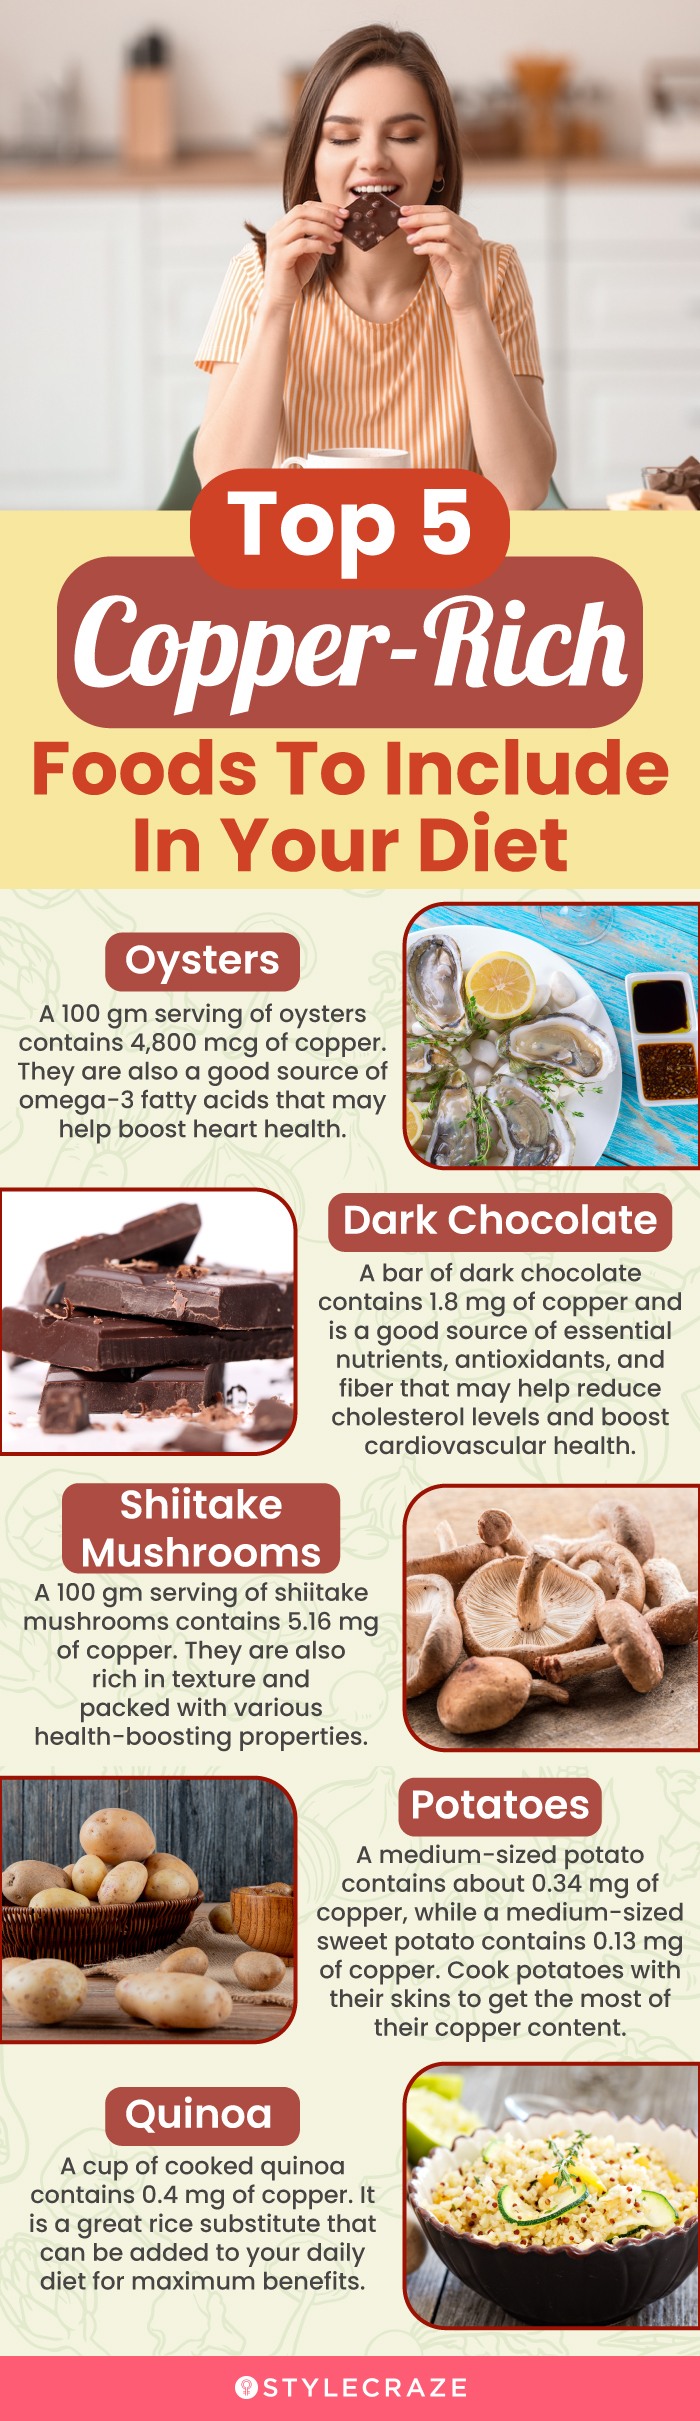 top 5 copper rich foods to include in your diet (infographic)